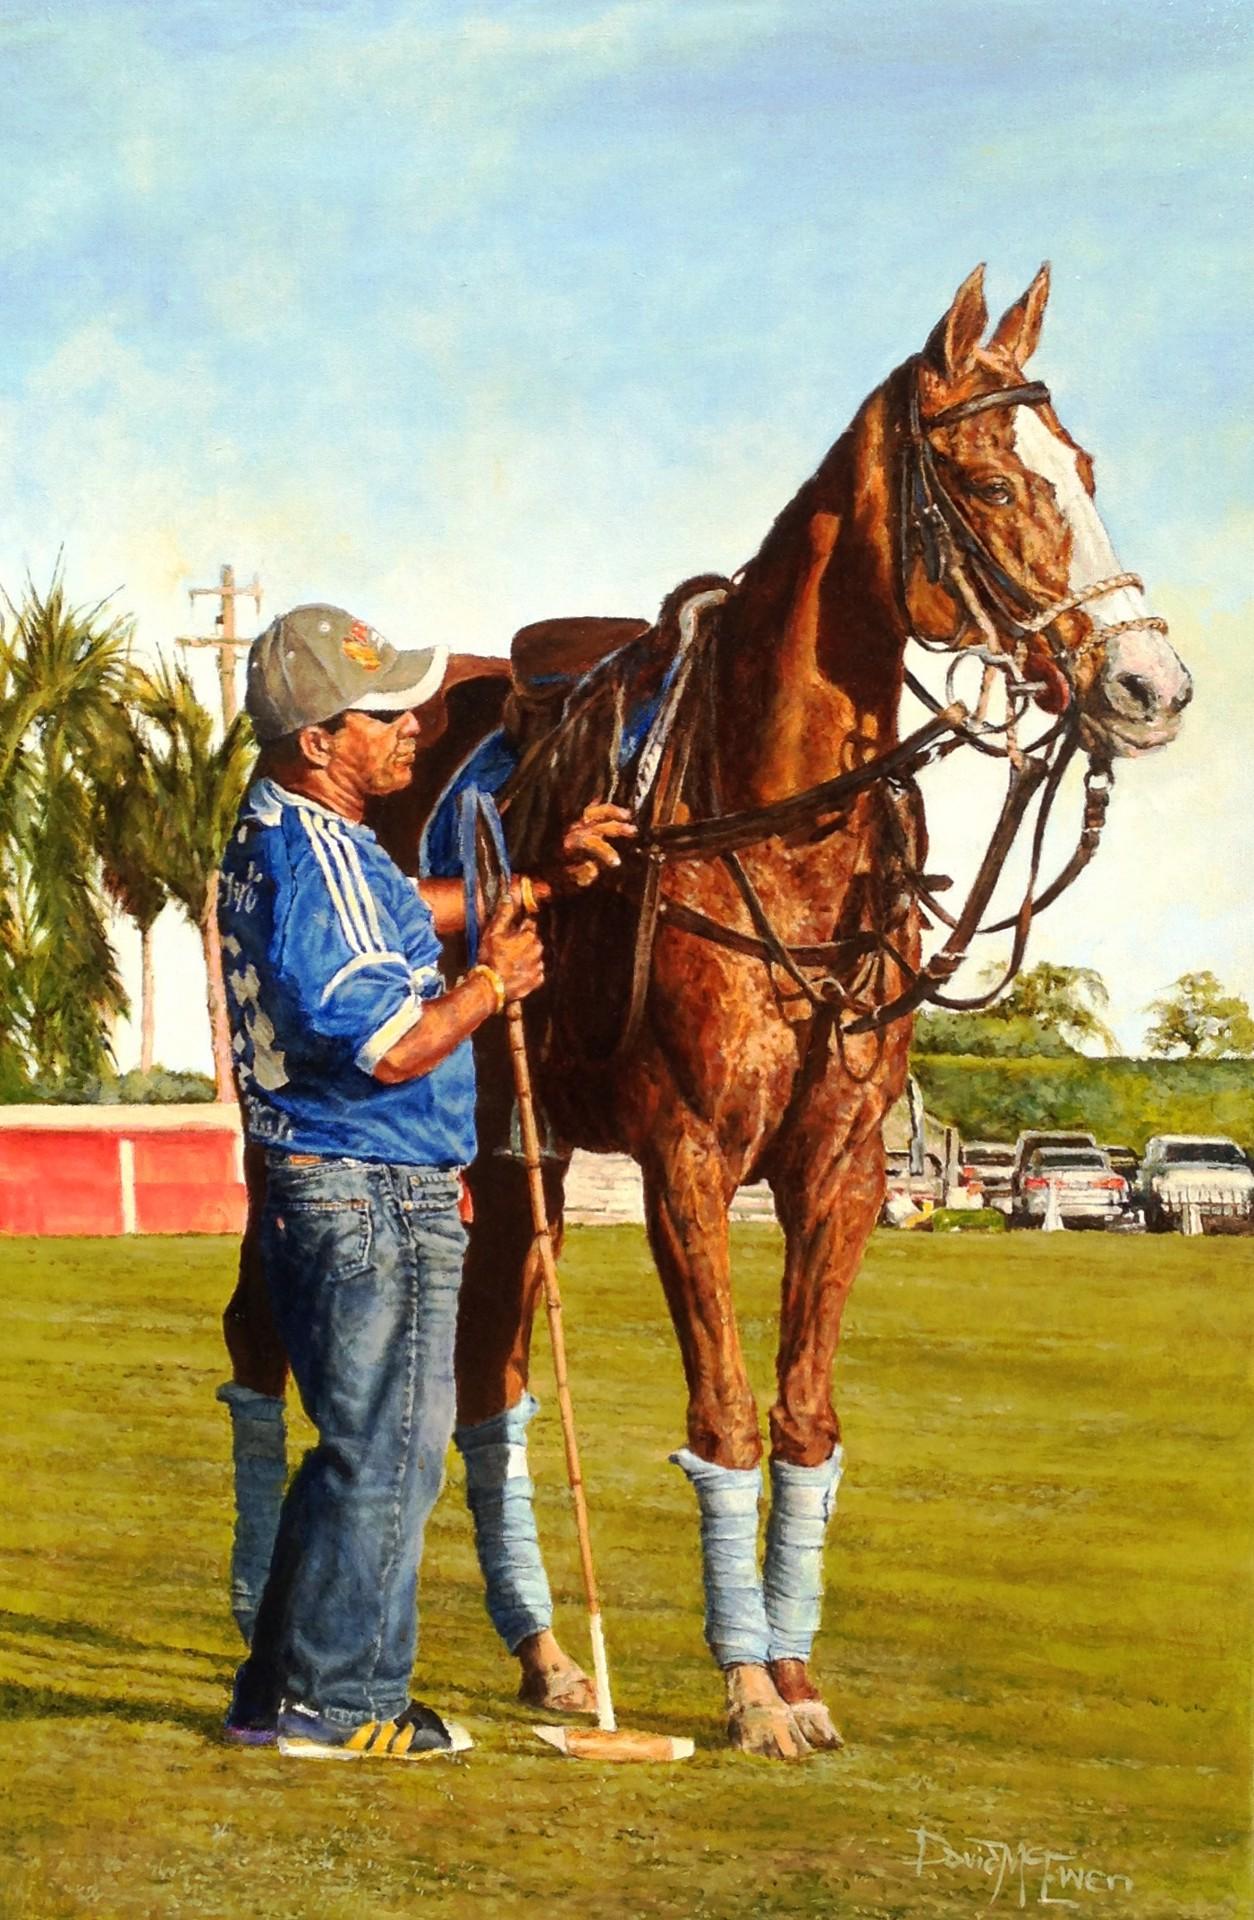 David McEwen Animal Painting - "Last Chukka" oil of Polo groom with his obedient Polo horse in Wellington, FL 